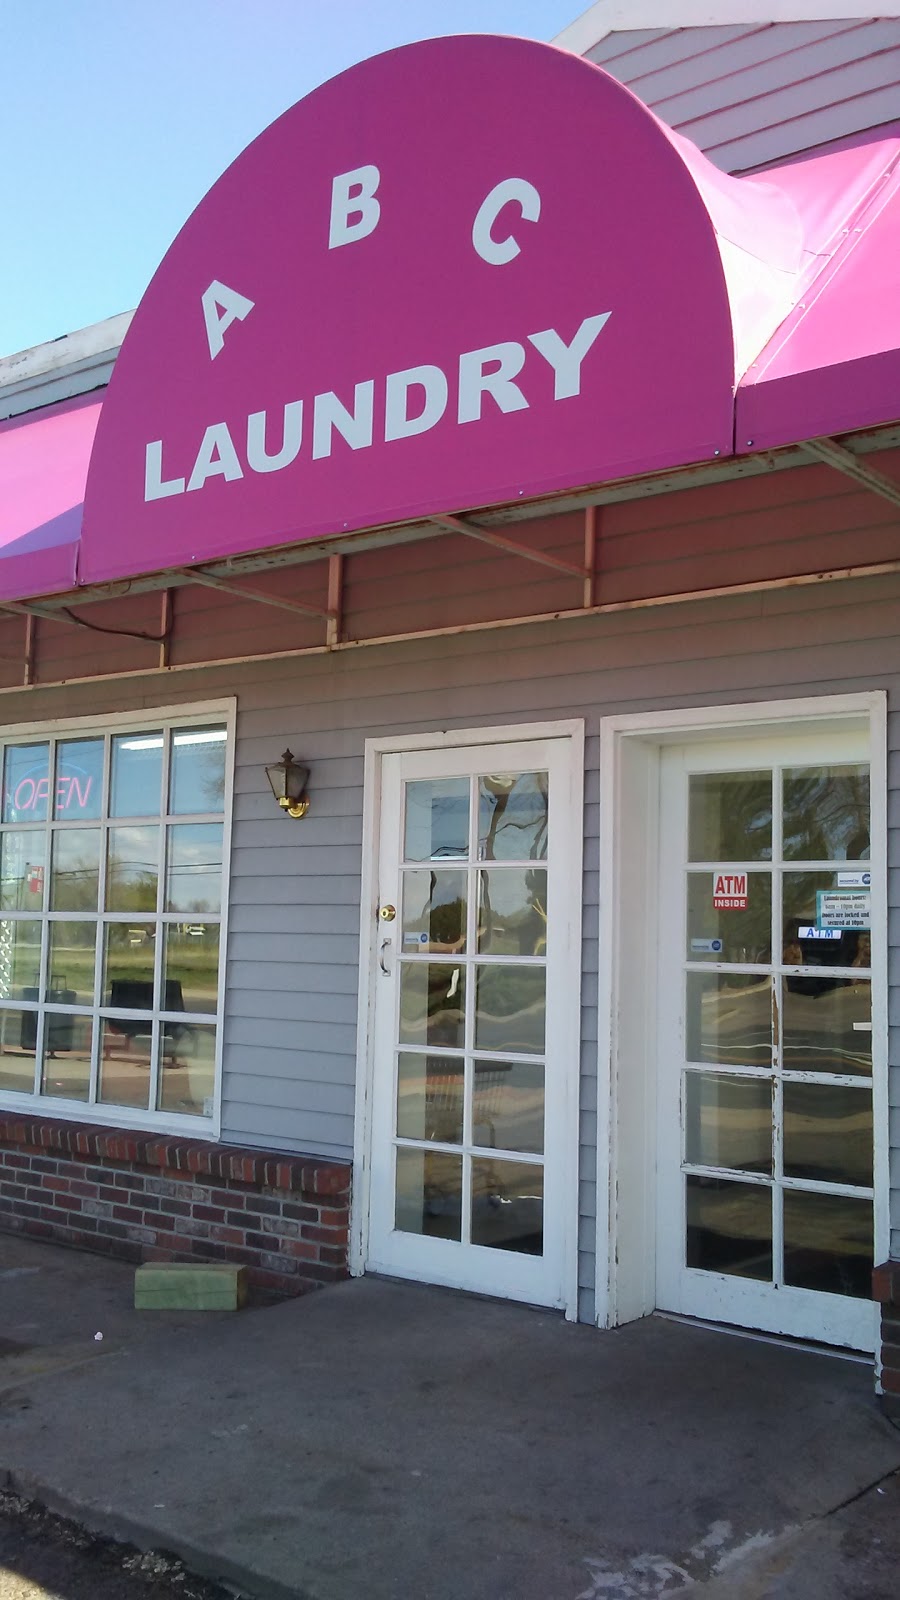 ABC Laundry - Always Bright and Clean | 9990 W. 44th Ave - SOUTH EAST Corner of W. 44th and Kipling Theres a large, pink awning right outside our front door. East of the car dealership, W 44th Ave, Wheat Ridge, CO 80033, USA | Phone: (720) 465-6800 ext. 7